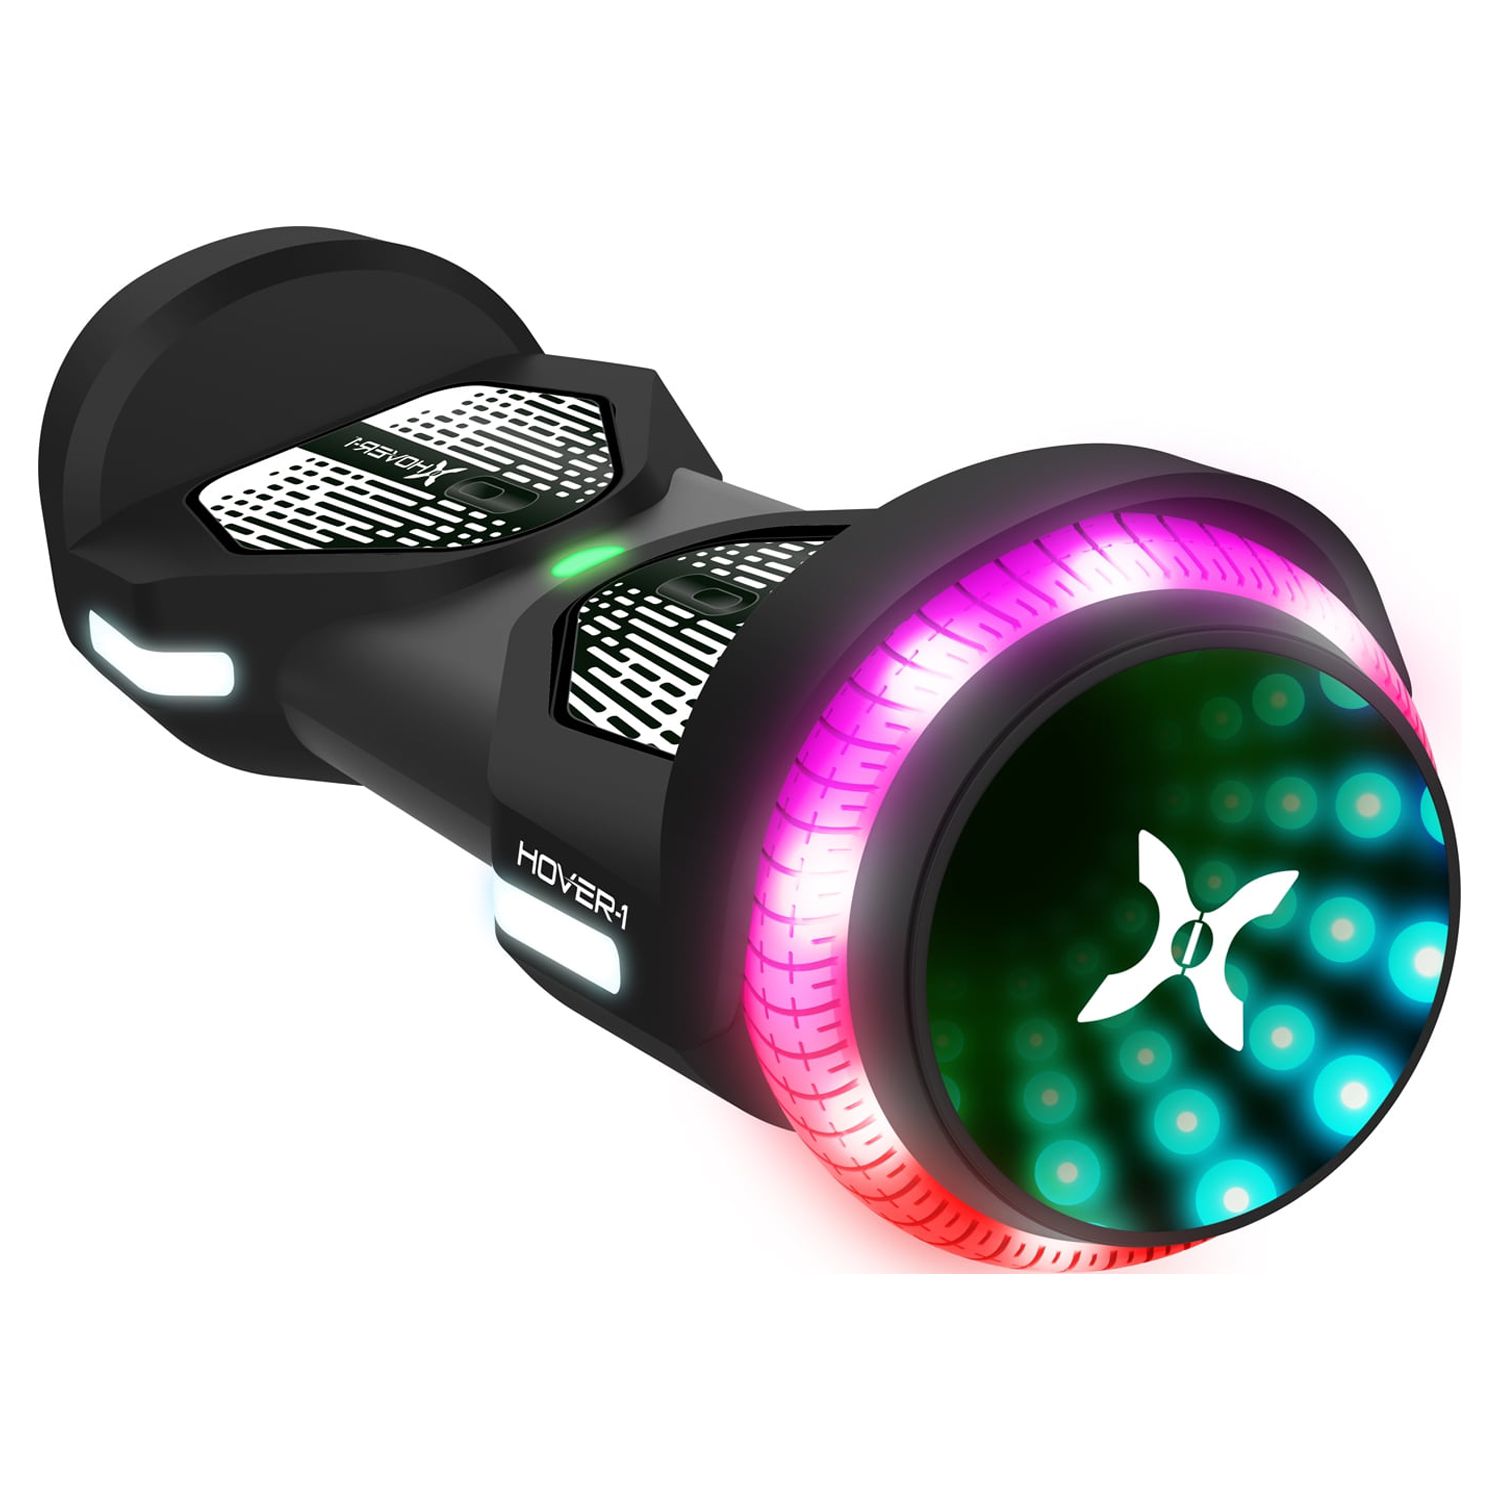 Hover-1 Allstar 2.0 Hoverboard for Teens, Black, Lightweight & Bluetooth, Max Speed 7 mph - image 3 of 6